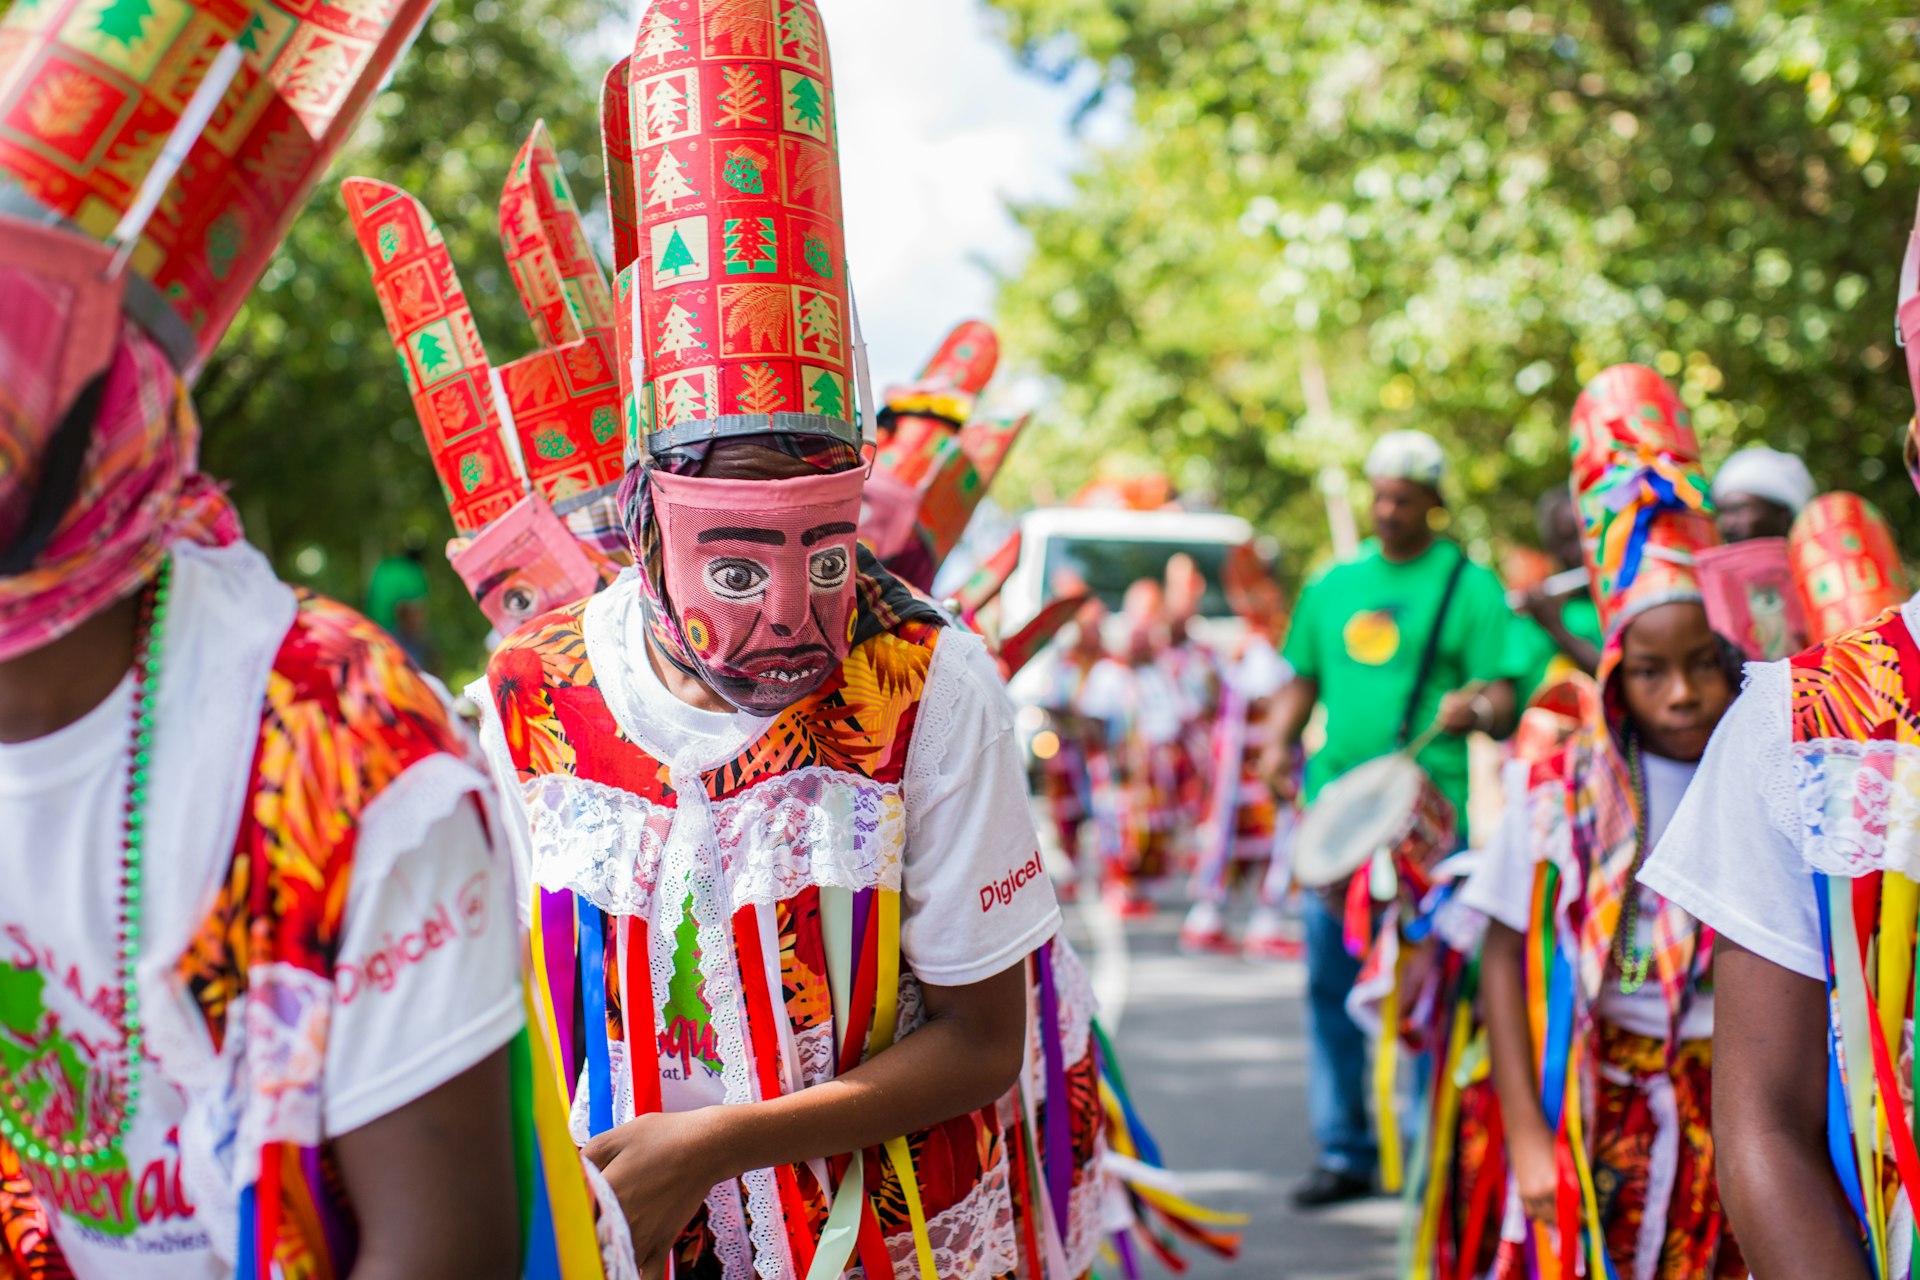 A group of people wear colorful African-inspired costumes during Montserrat's St Patrick's celebrations